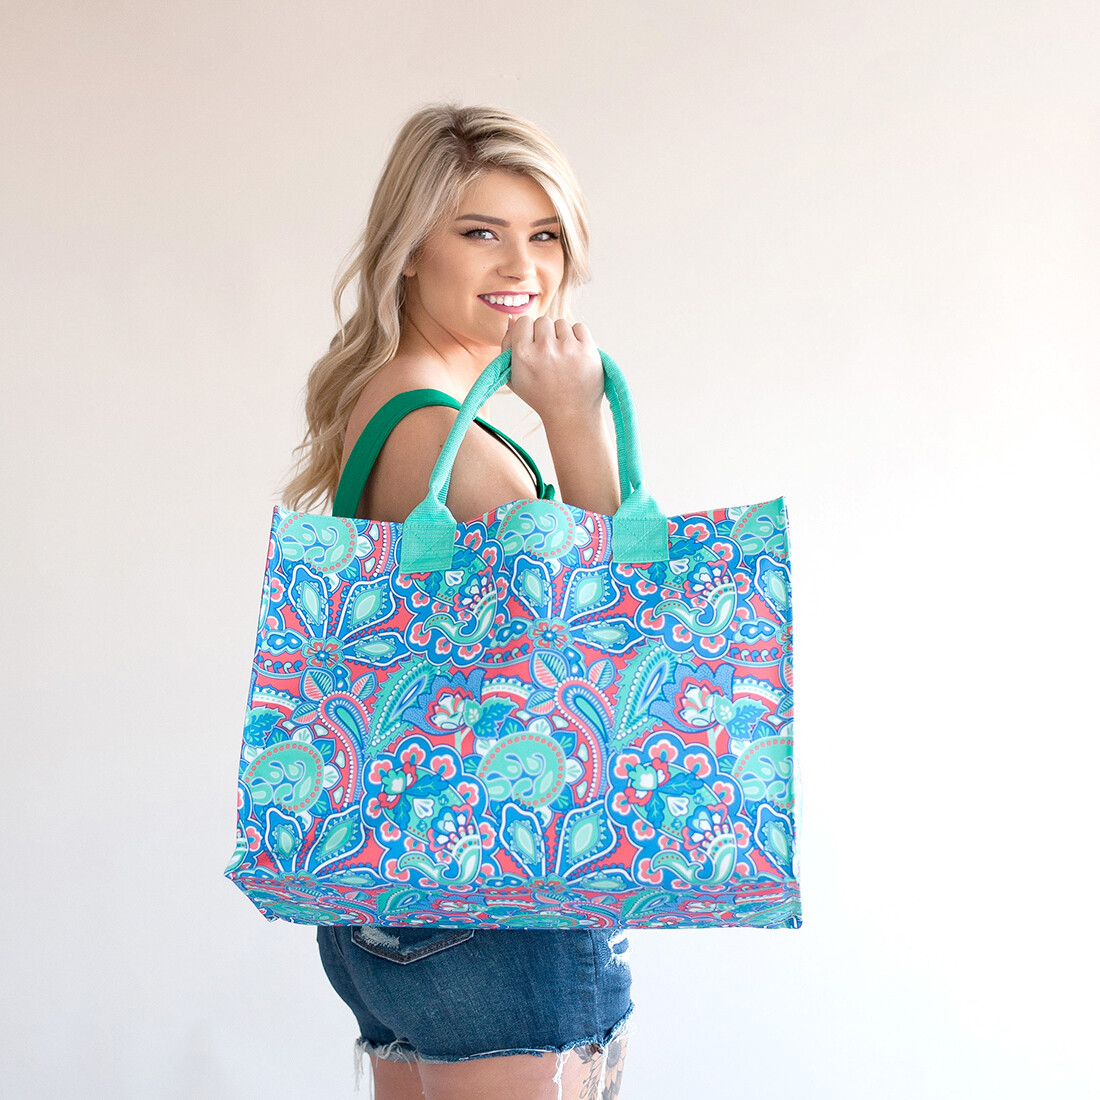 Island Bliss Tote